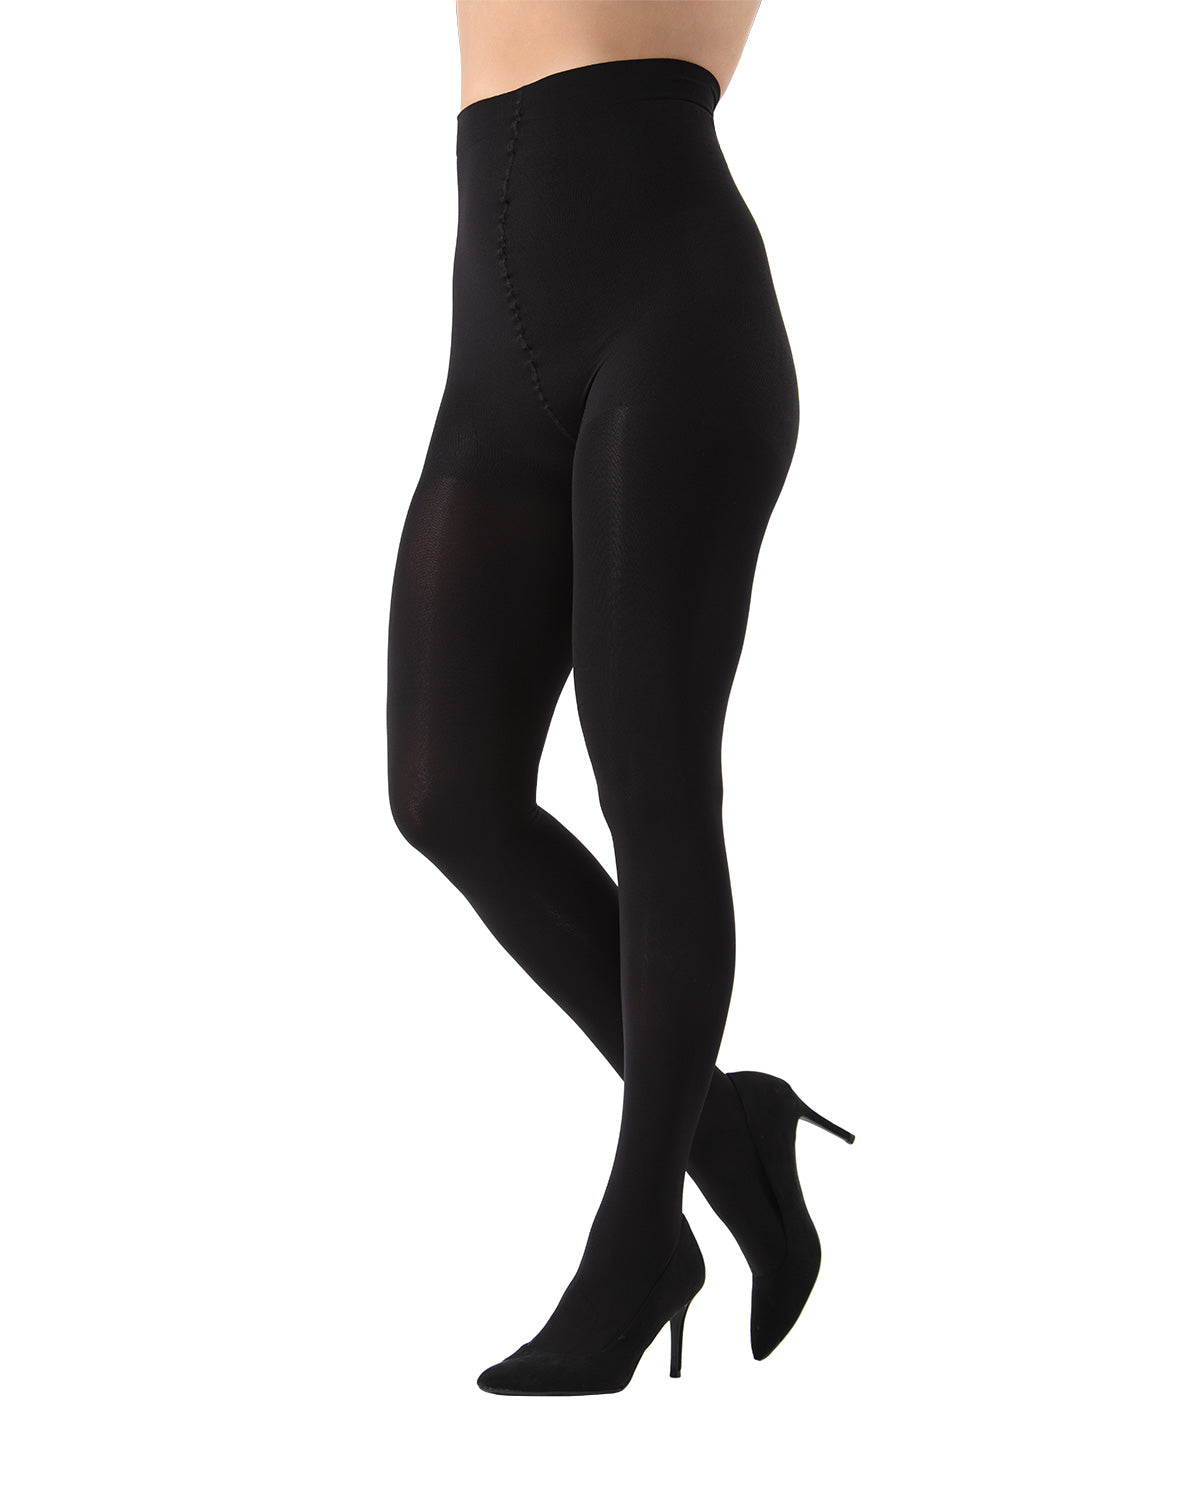 Memoi Heather Microfiber Opaque Control Top Tights - 2 Pack - MO 133 –  Little Toes